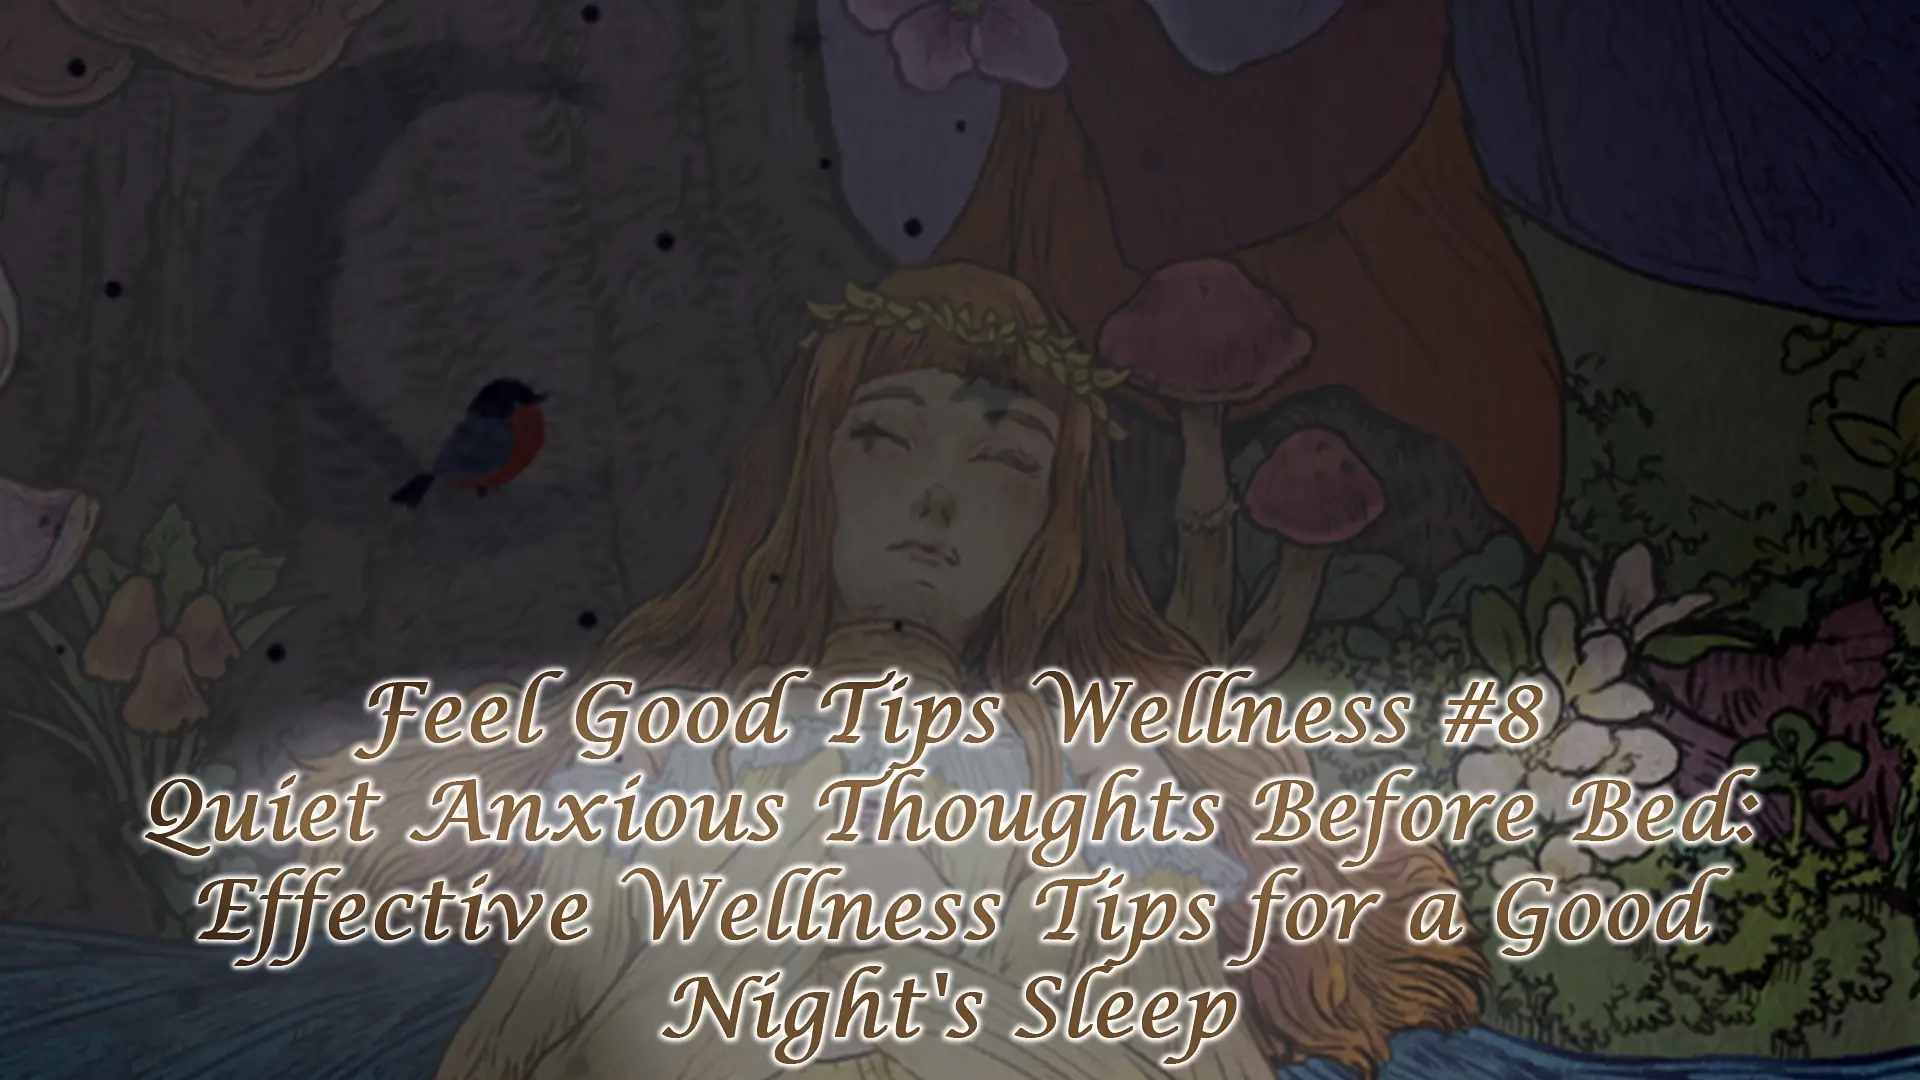 Quiet Anxious Thoughts Before Bed: Effective Wellness Tips for a Good Night's Sleep